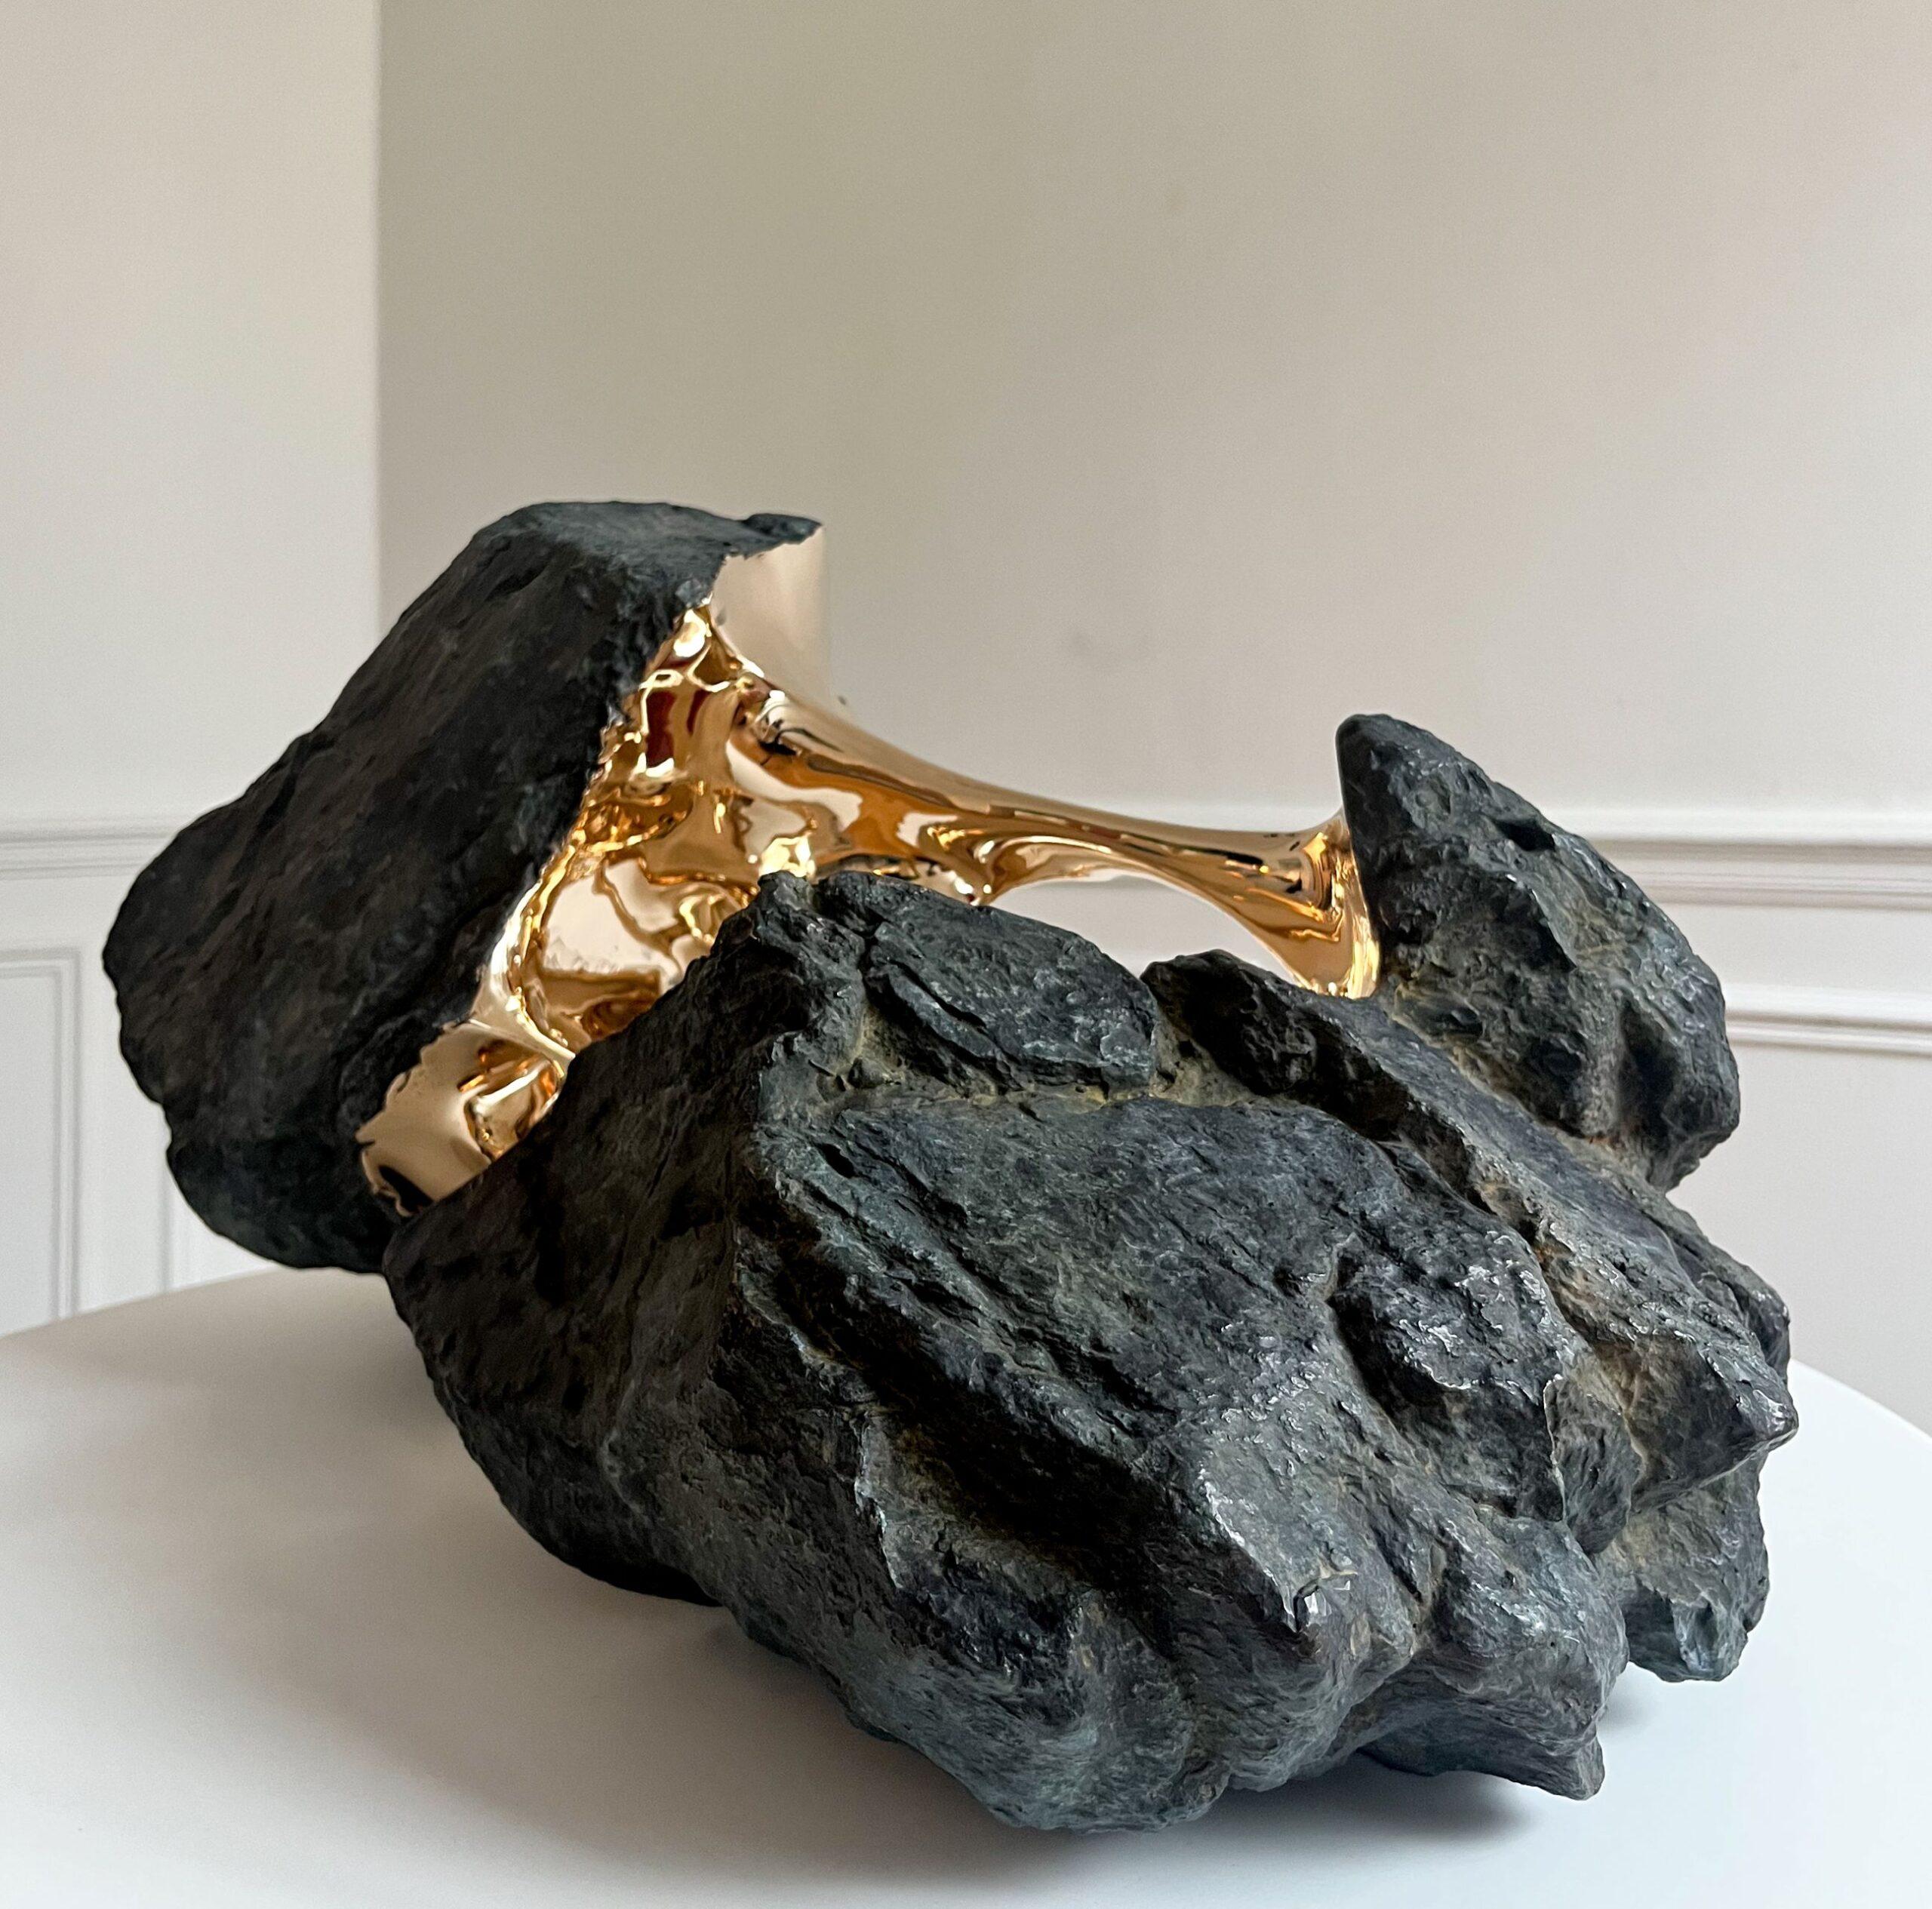 Kairos by Romain Langlois - Rock-like bronze sculpture, golden, abstract For Sale 7